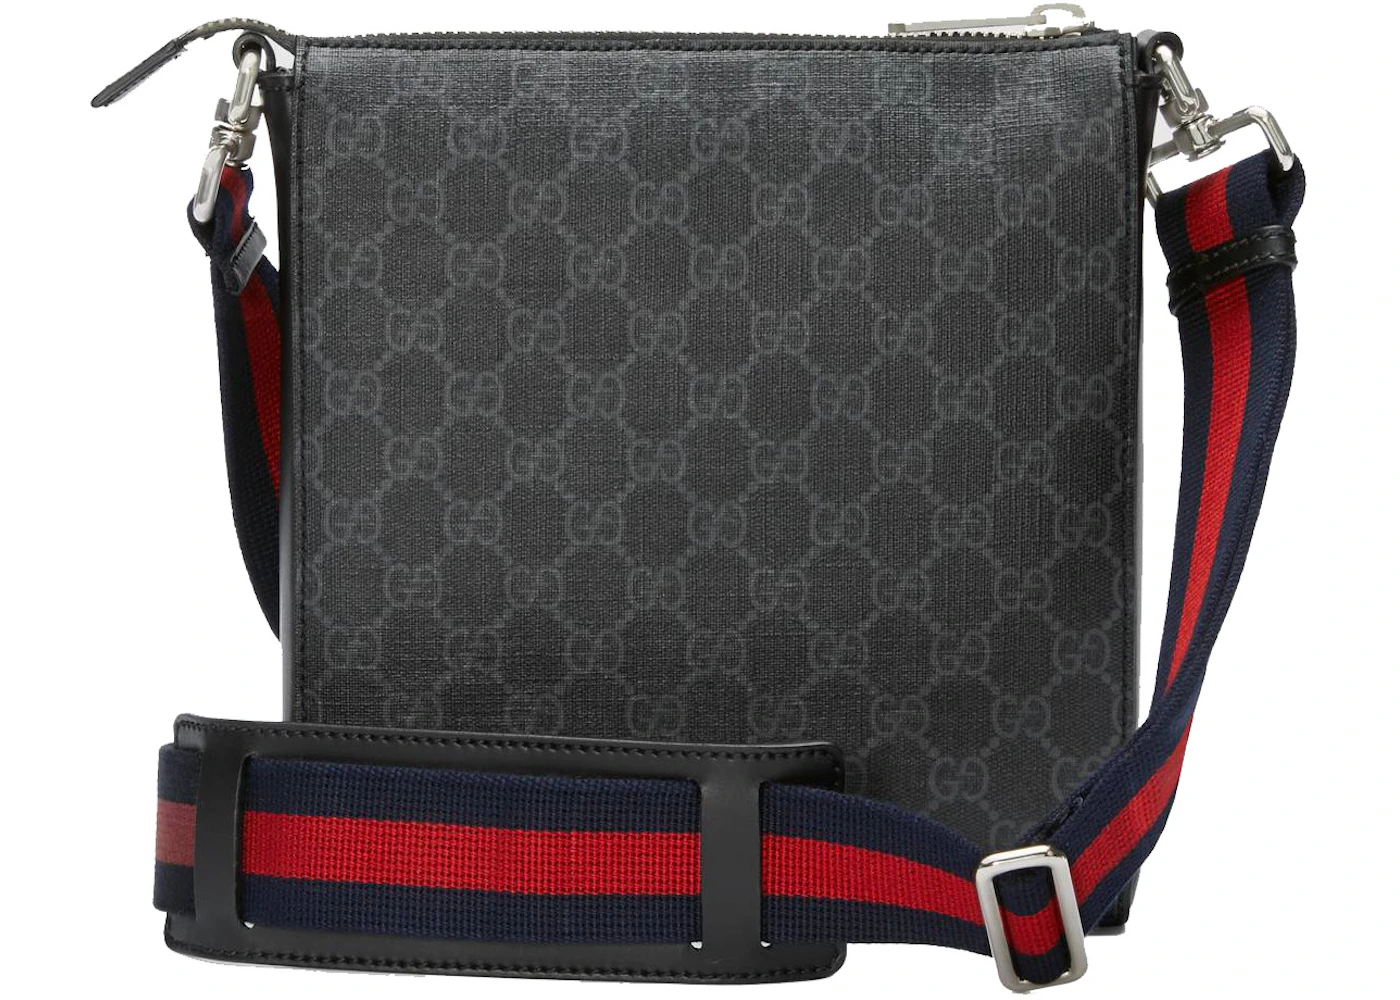 Gucci Night Courrier Messenger GG Supreme Black/Grey in Canvas with ...